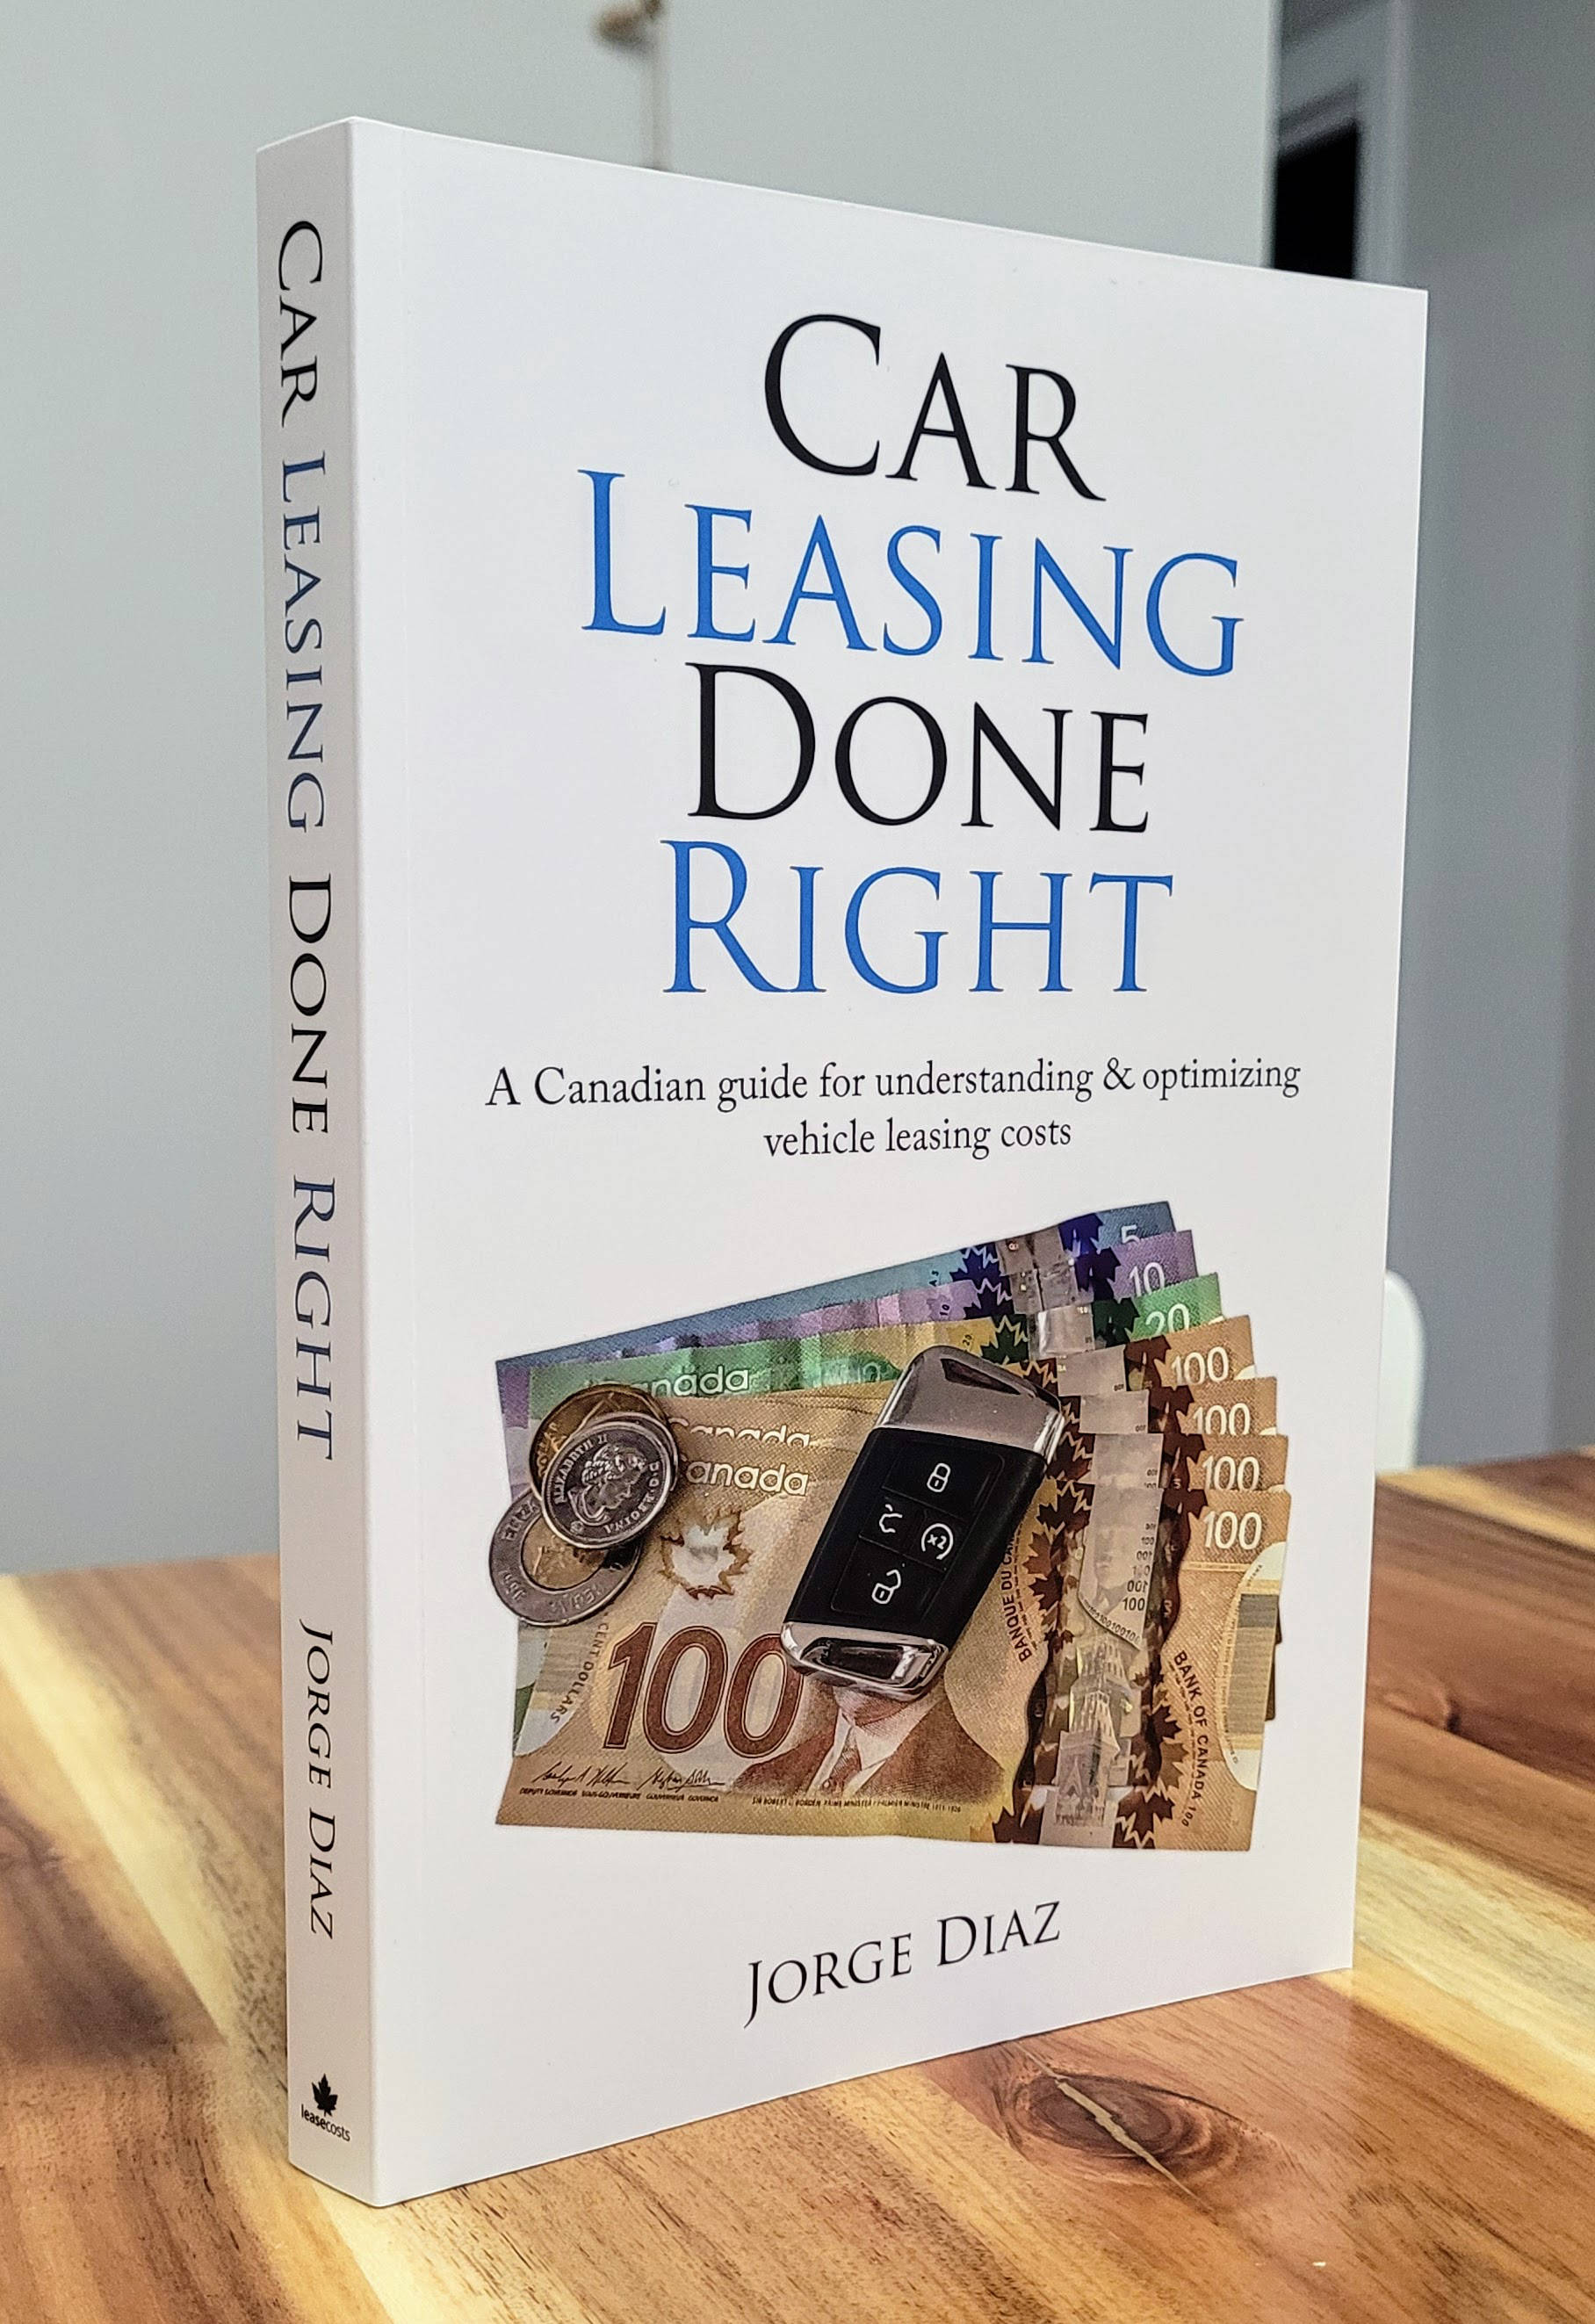 Car Leasing Done Right Book - LeaseCosts Canada